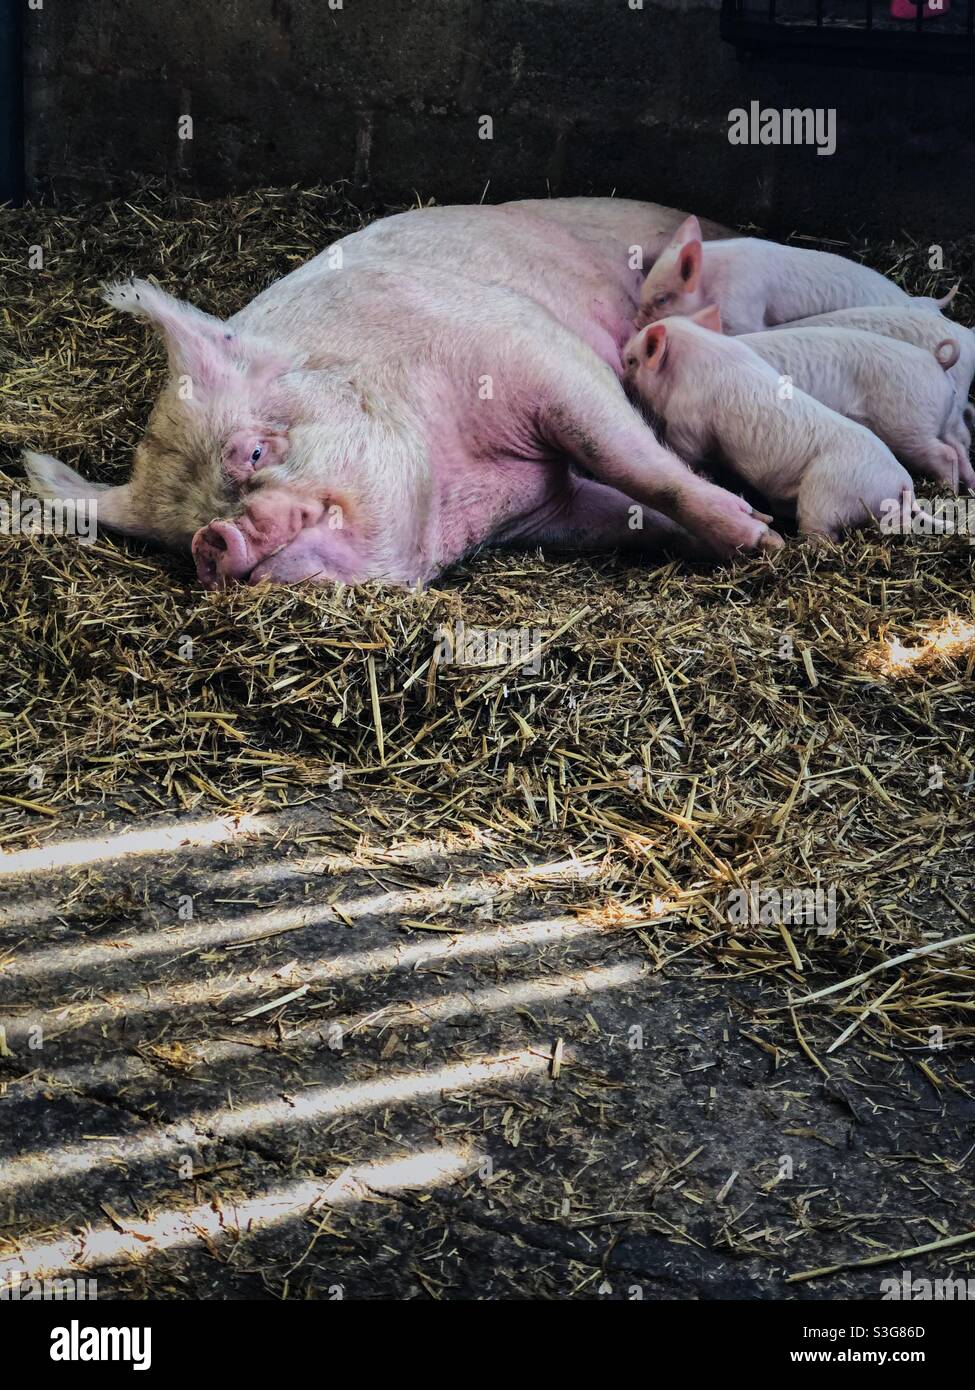 Sow feeding piglets in barn with contrasting sunshine and shadows on floor. Stock Photo